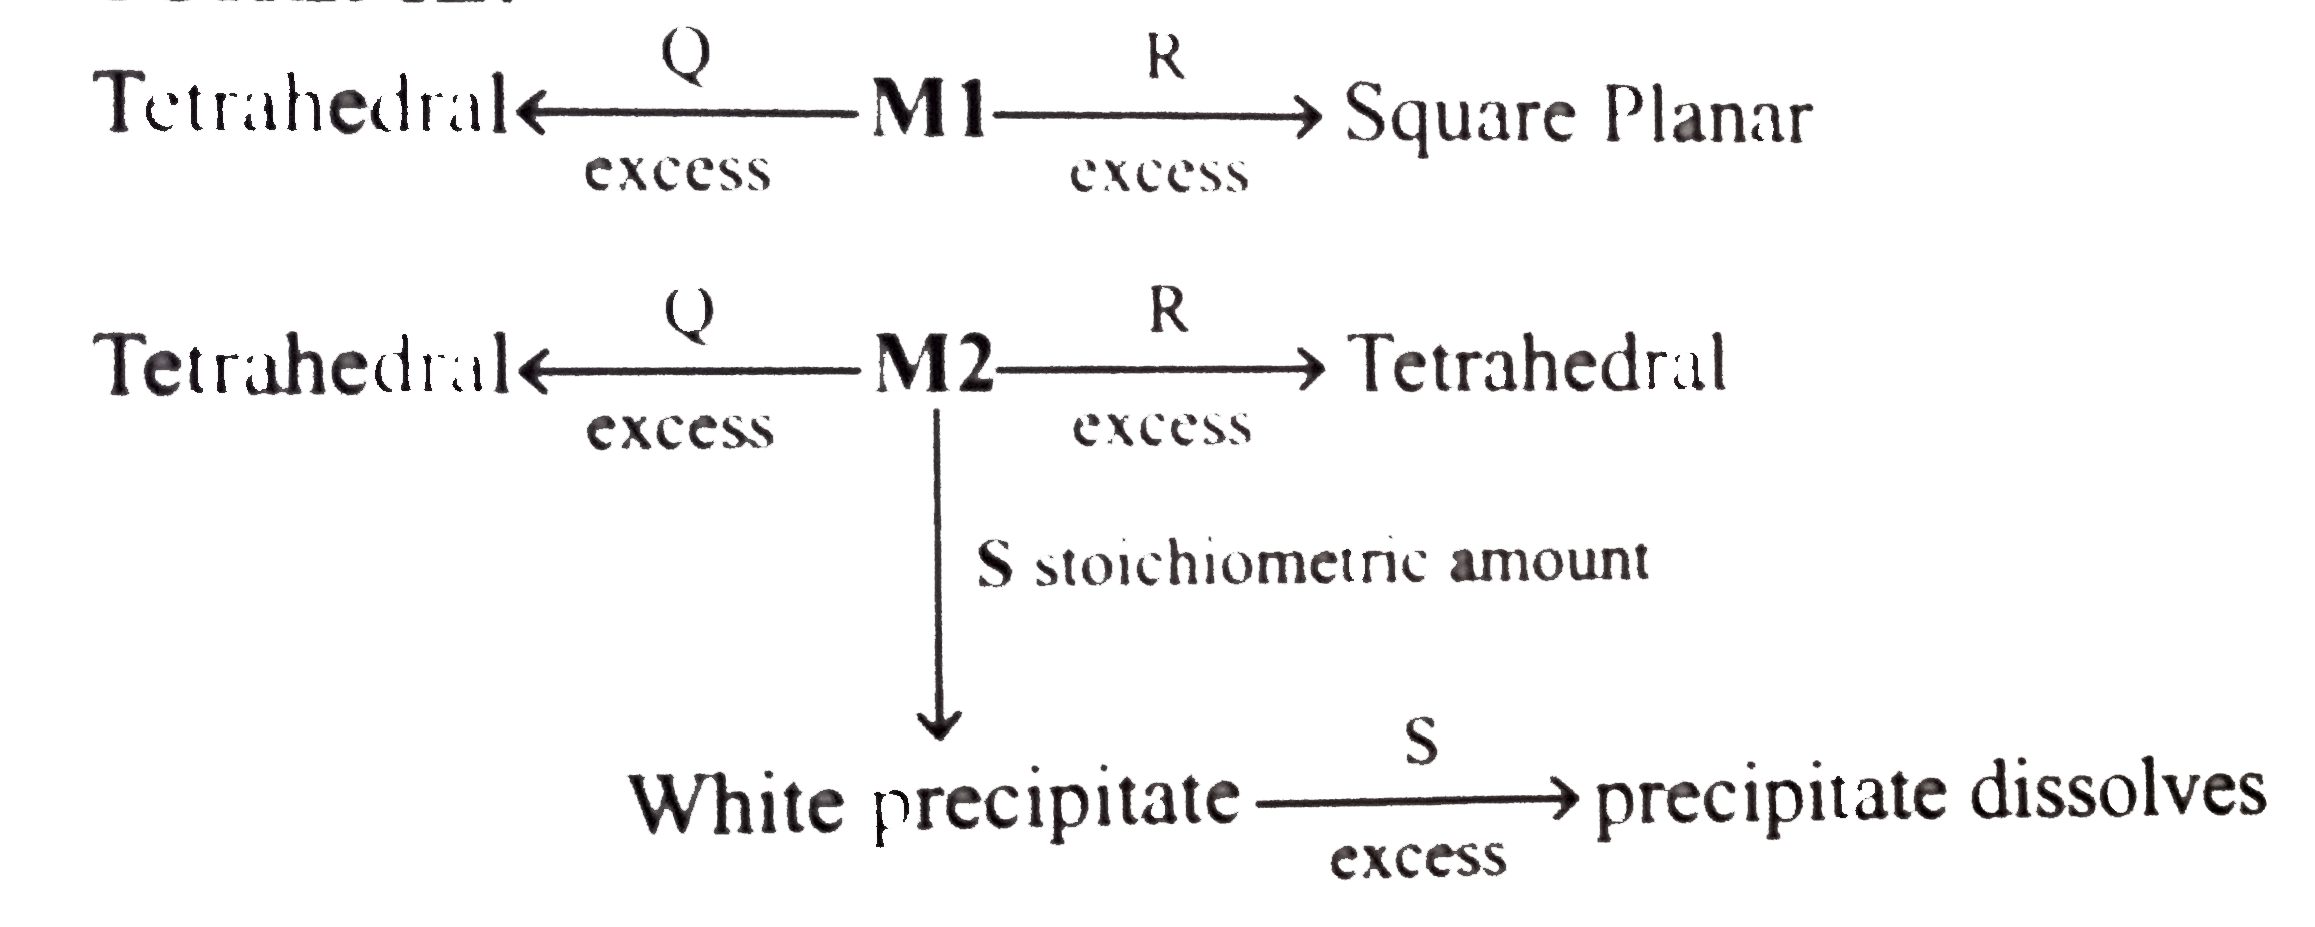 An aqueous solution of metal ion MI reacts separately with reagents Q and R in excess to give tetrahedral and square planar complexes, respectively An aqueous solution of another metal ion M2 always forms tetrahedral complexs with theses reagents. Aqueous solution of M2 on reaction with reagent S gives white precipitate which dissolves in excess of S The reactions are summarised in the scheme given below:  SCHEME :    
What is M2